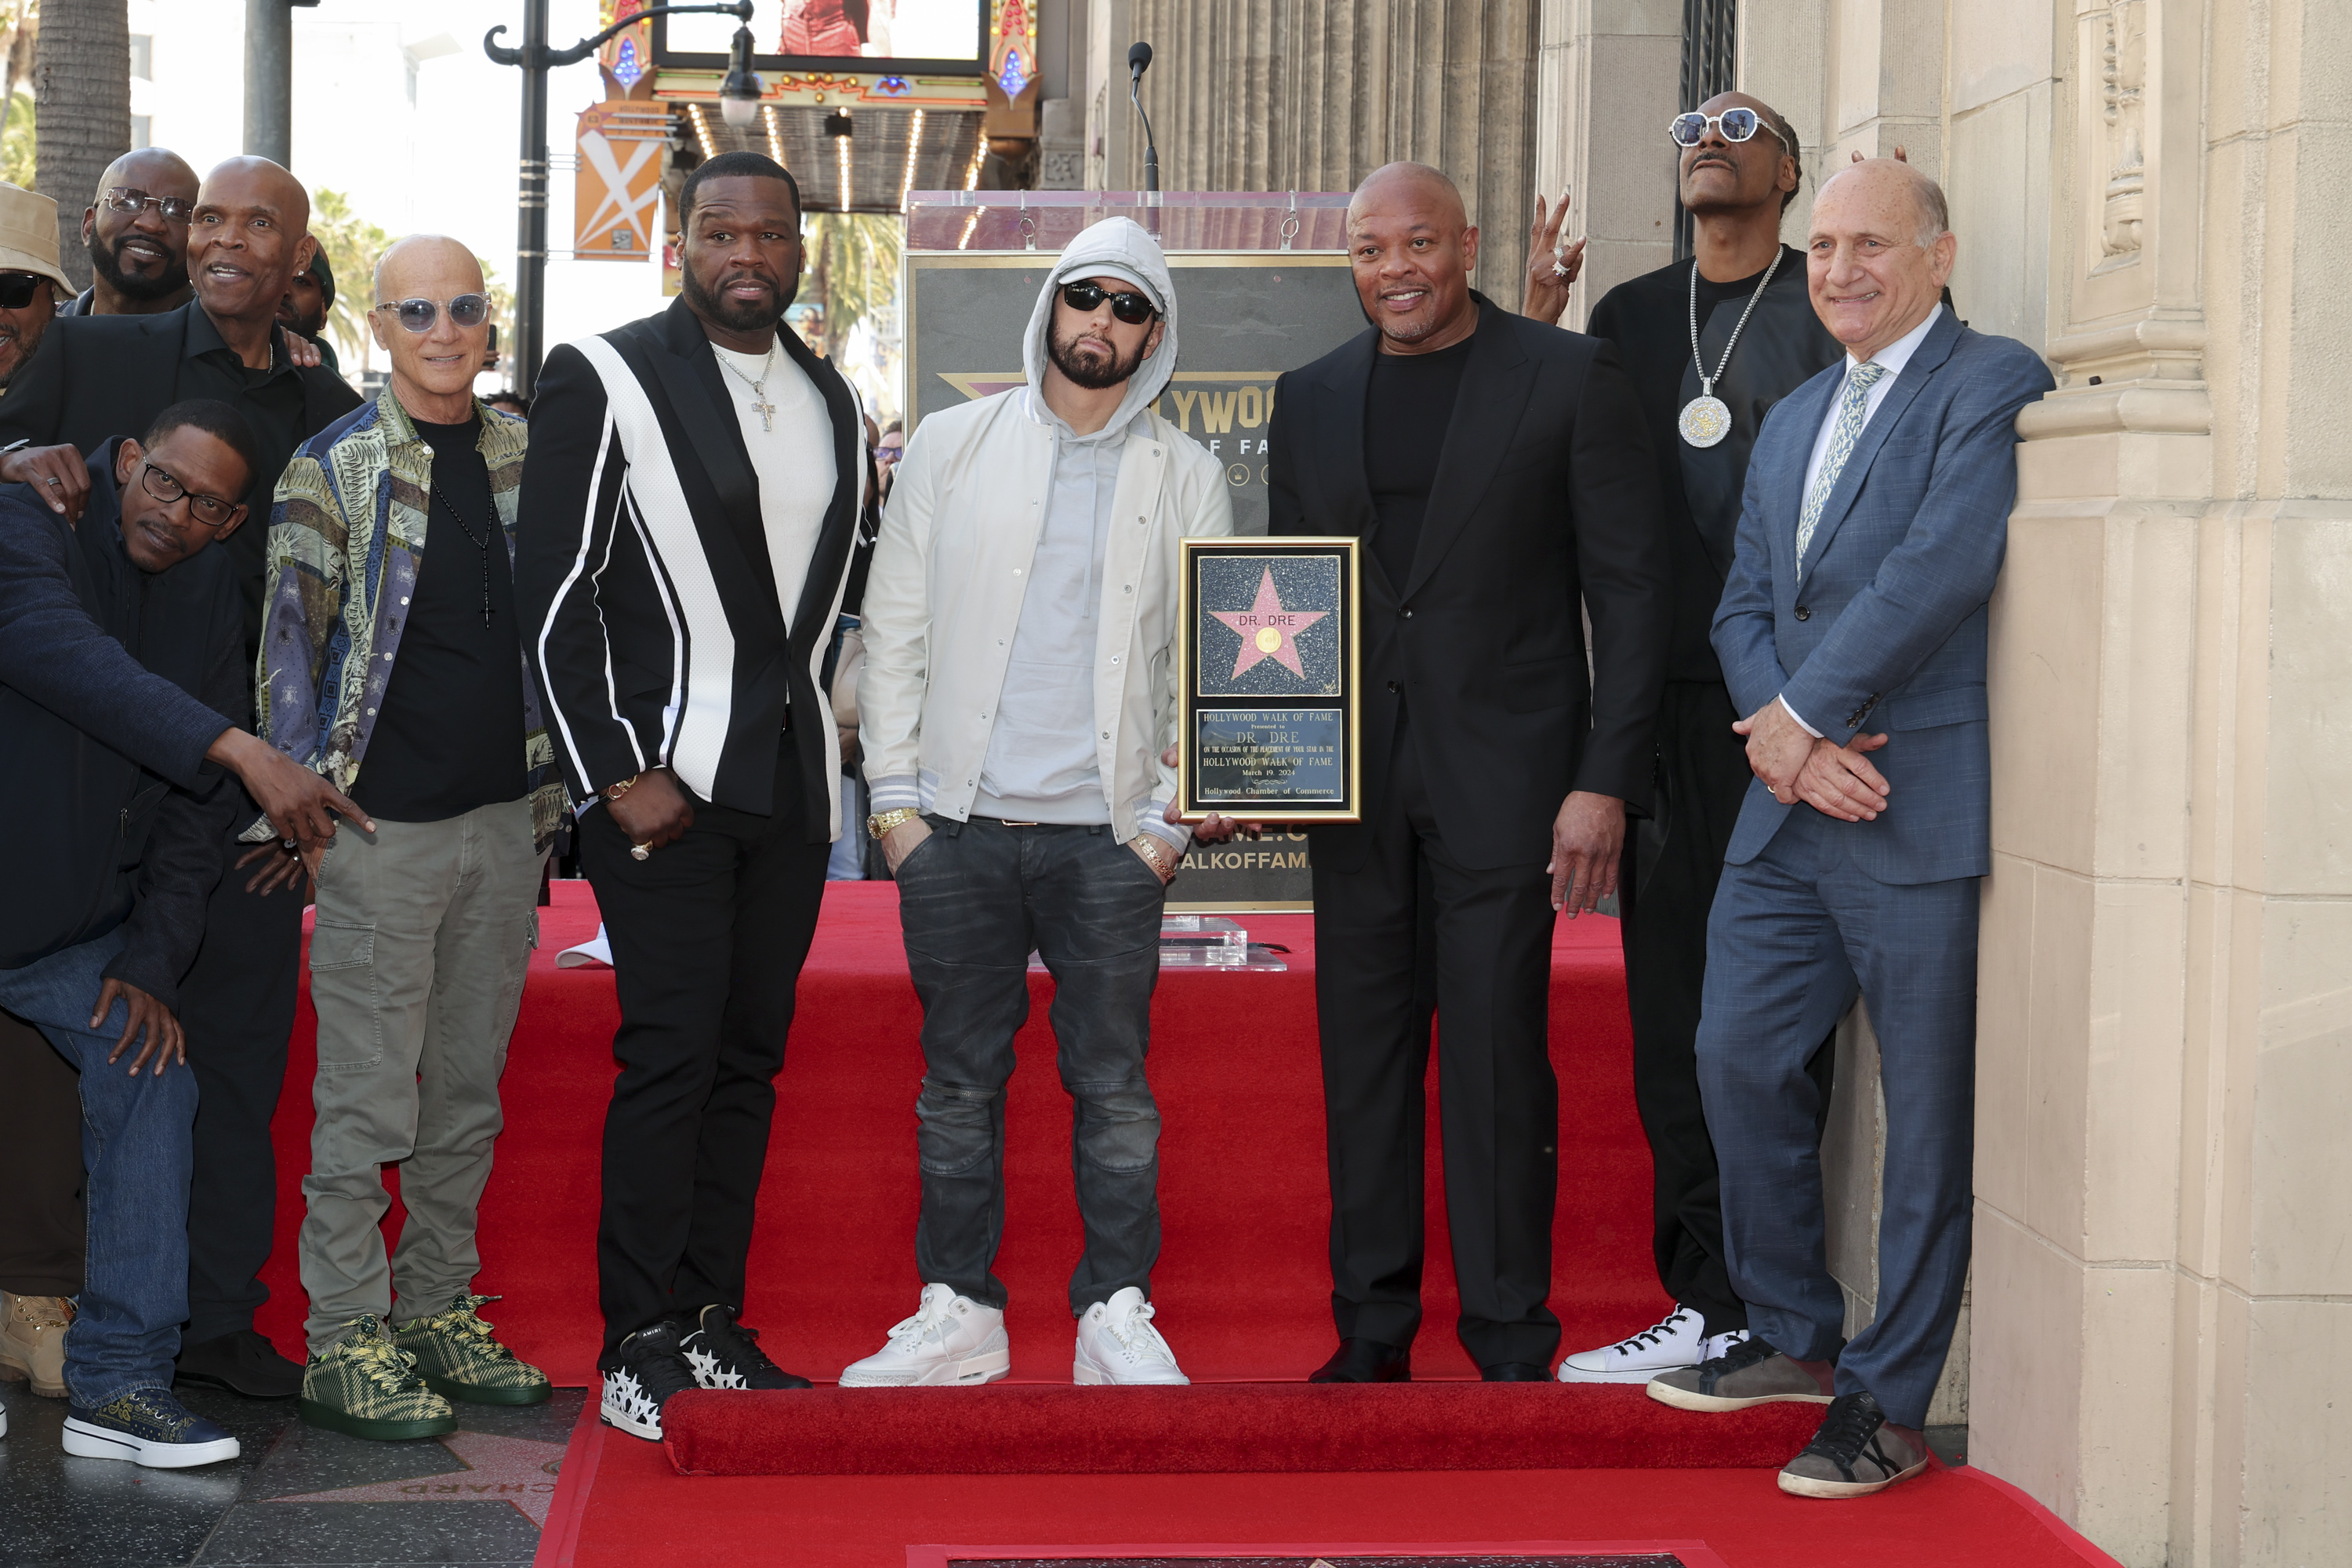 Michael "Harry-O" Harris, Kurupt, Big Boy, Jimmy Iovine, 50 Cent, Eminem, Dr. Dre, Snoop Dogg and Steve Nissen at the Hollywood Walk of Fame in 2024 | Source: Getty Images